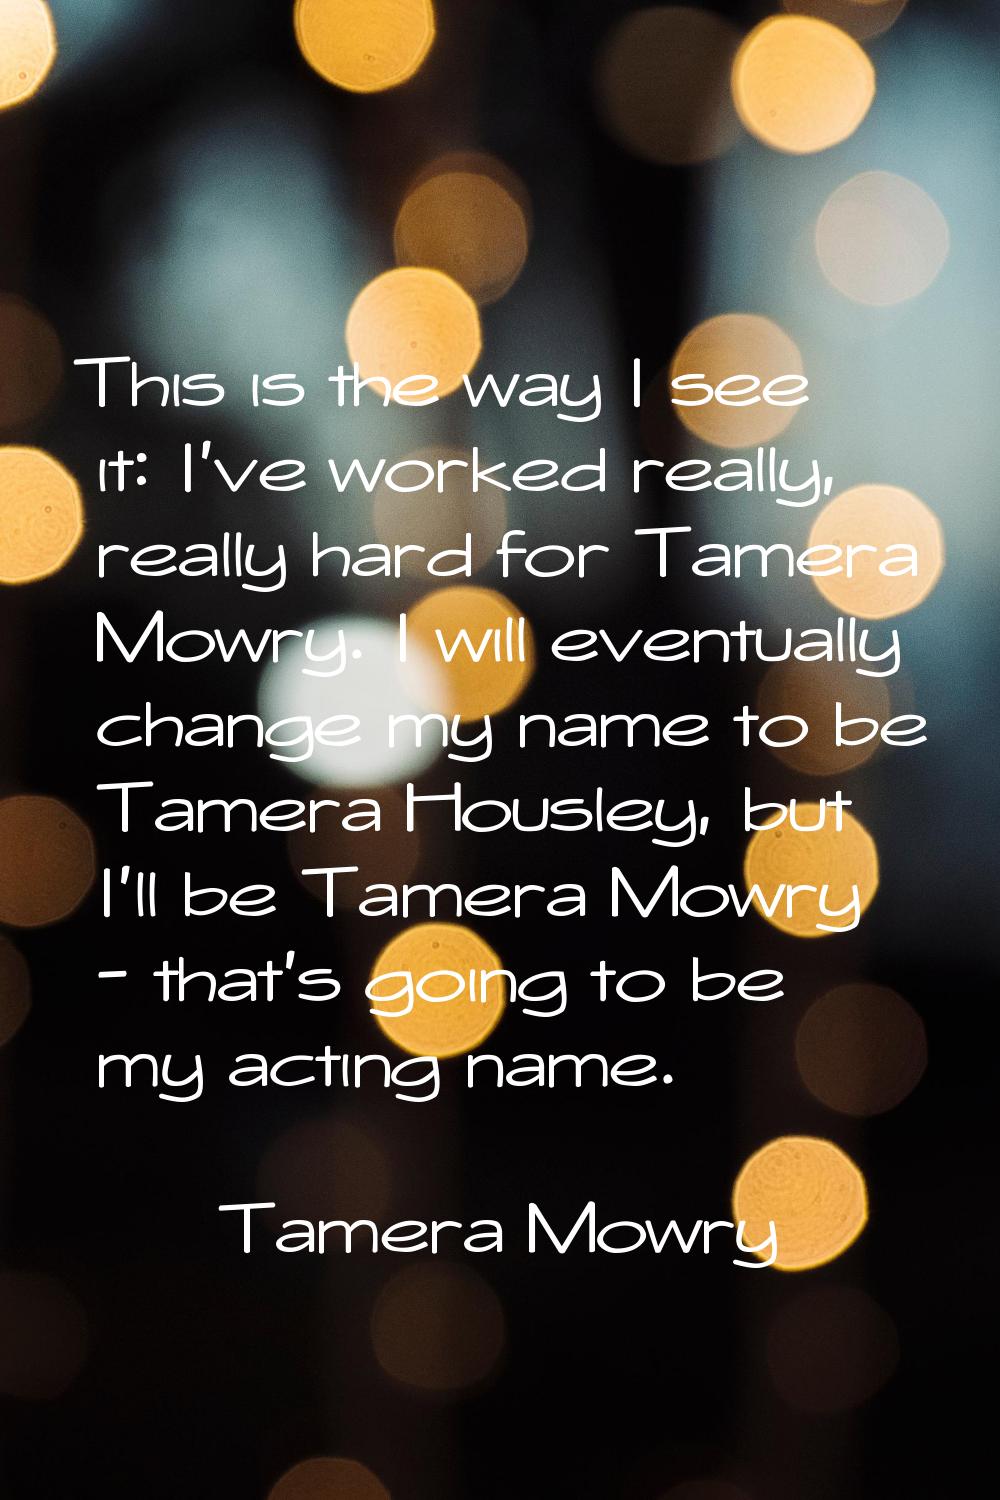 This is the way I see it: I've worked really, really hard for Tamera Mowry. I will eventually chang